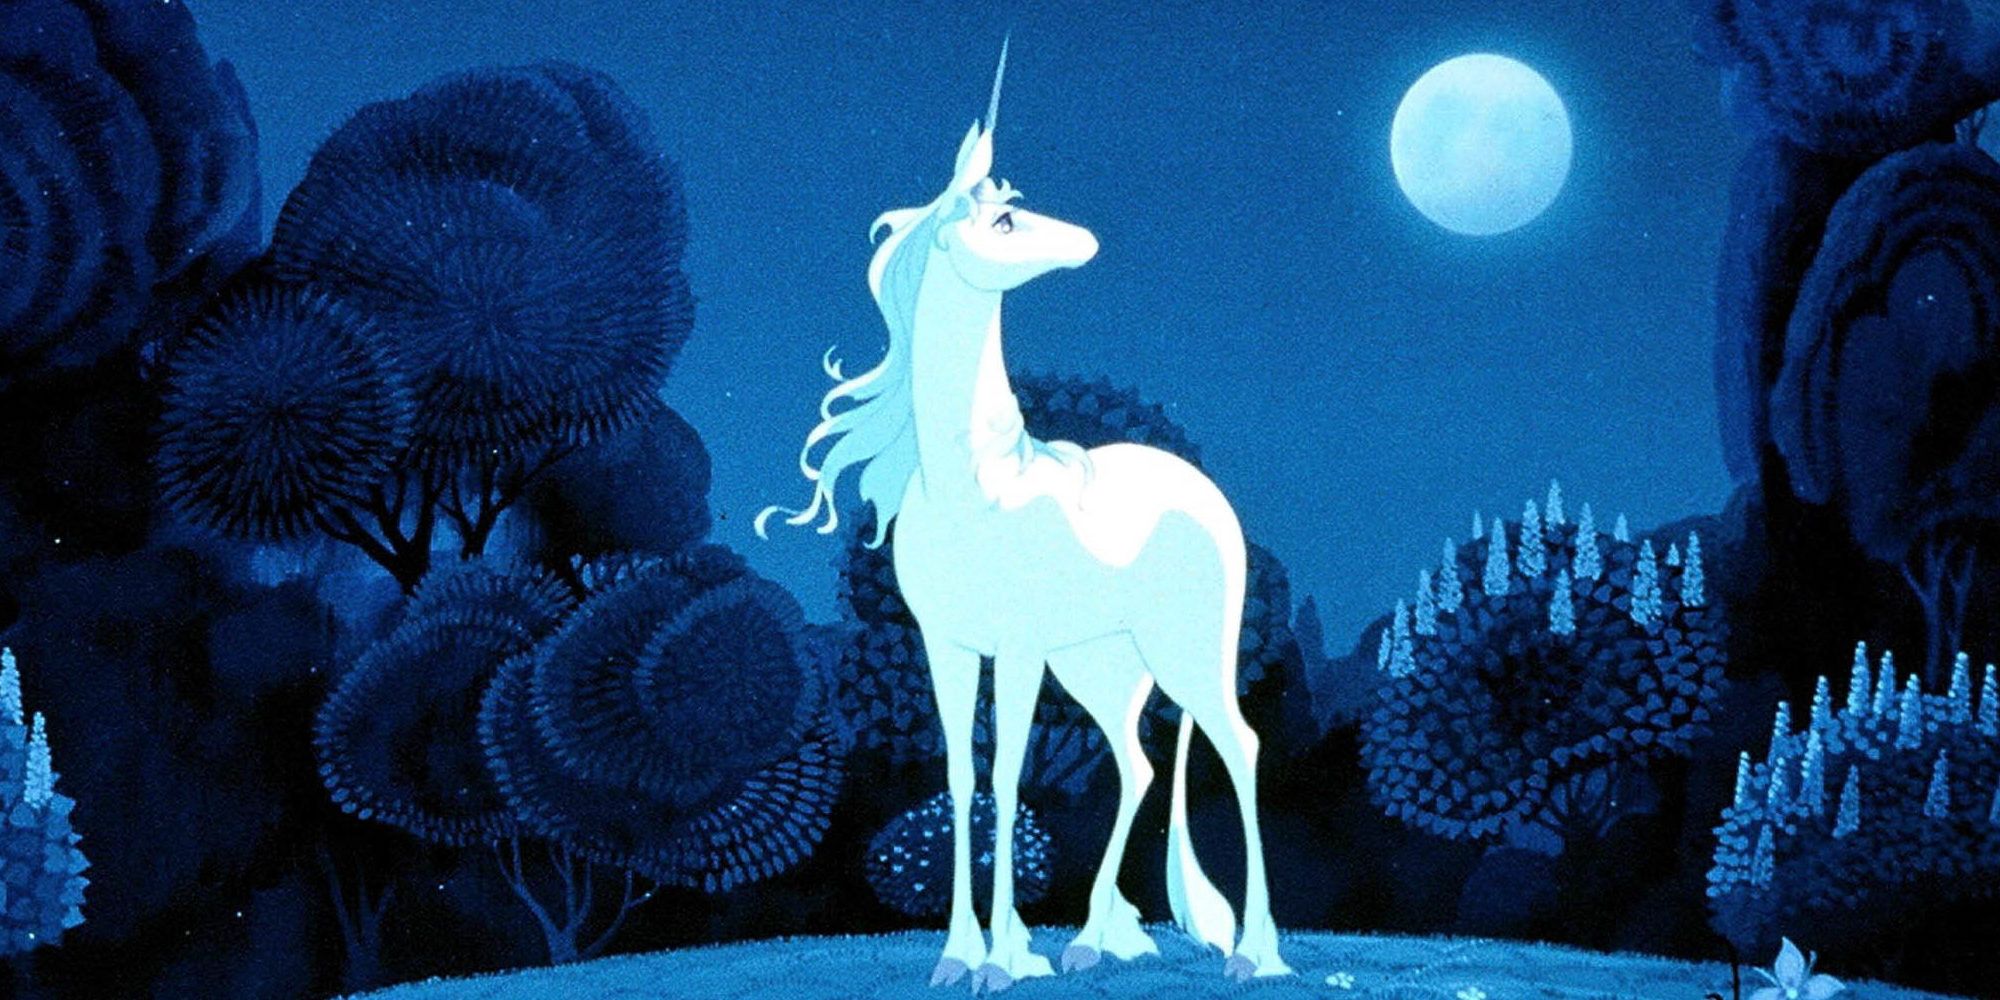 The Last Unicorn before her journey begins